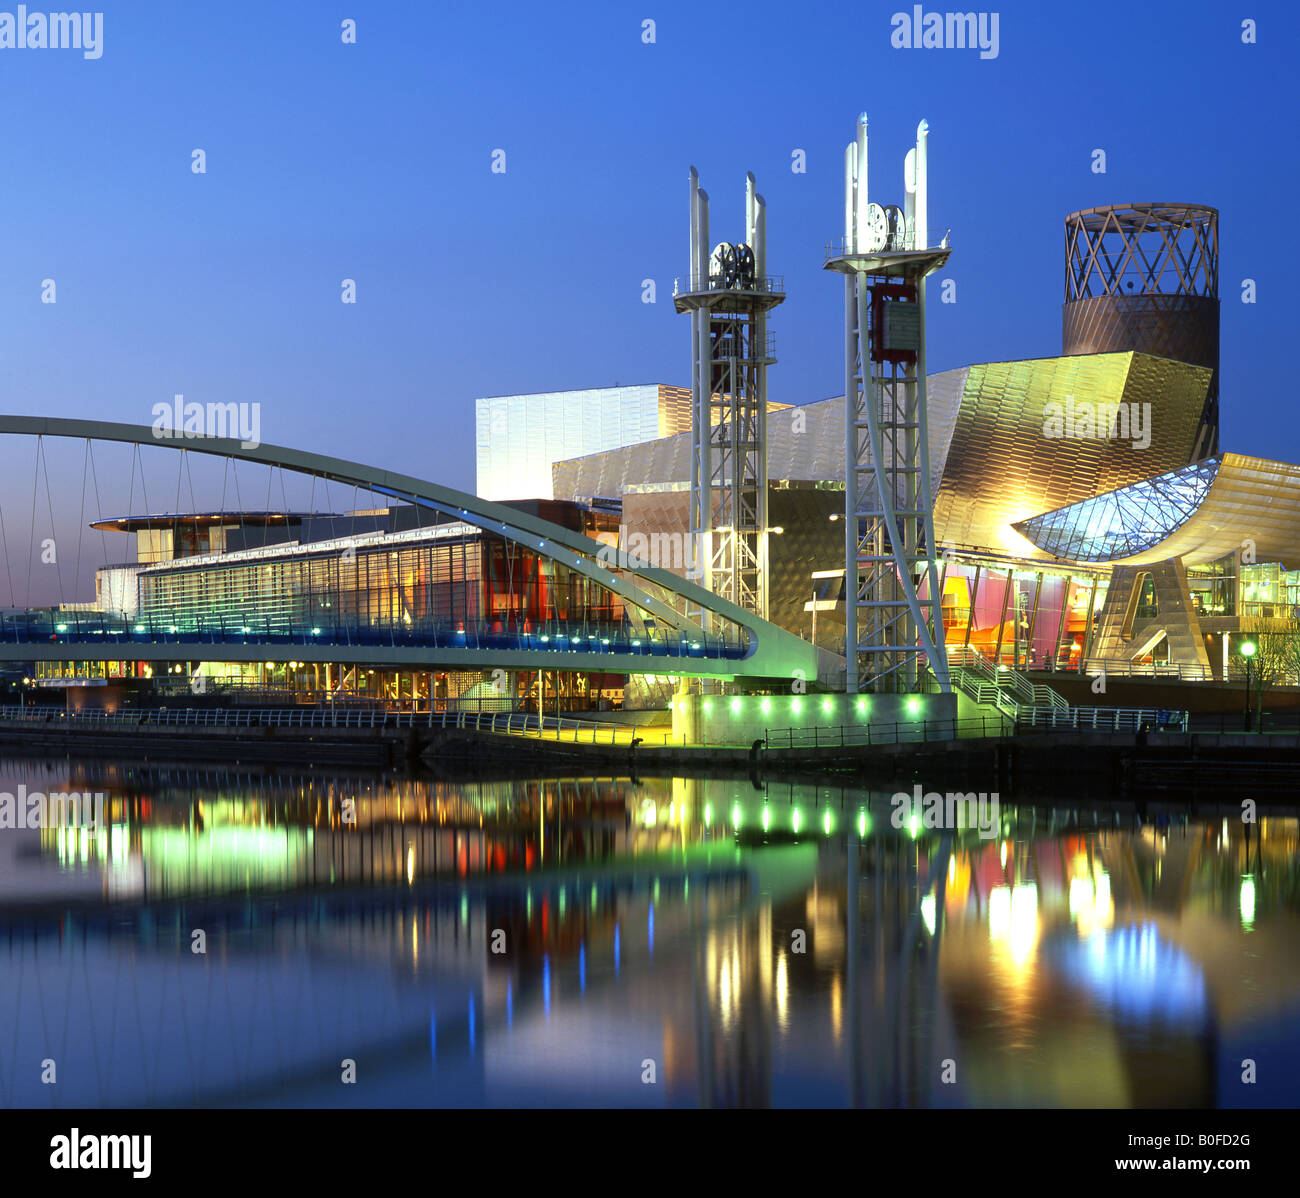 The Lowry Centre Theatre and Footbridge at Night, Salford Quays, Greater Manchester, Angleterre, Royaume-Uni Banque D'Images